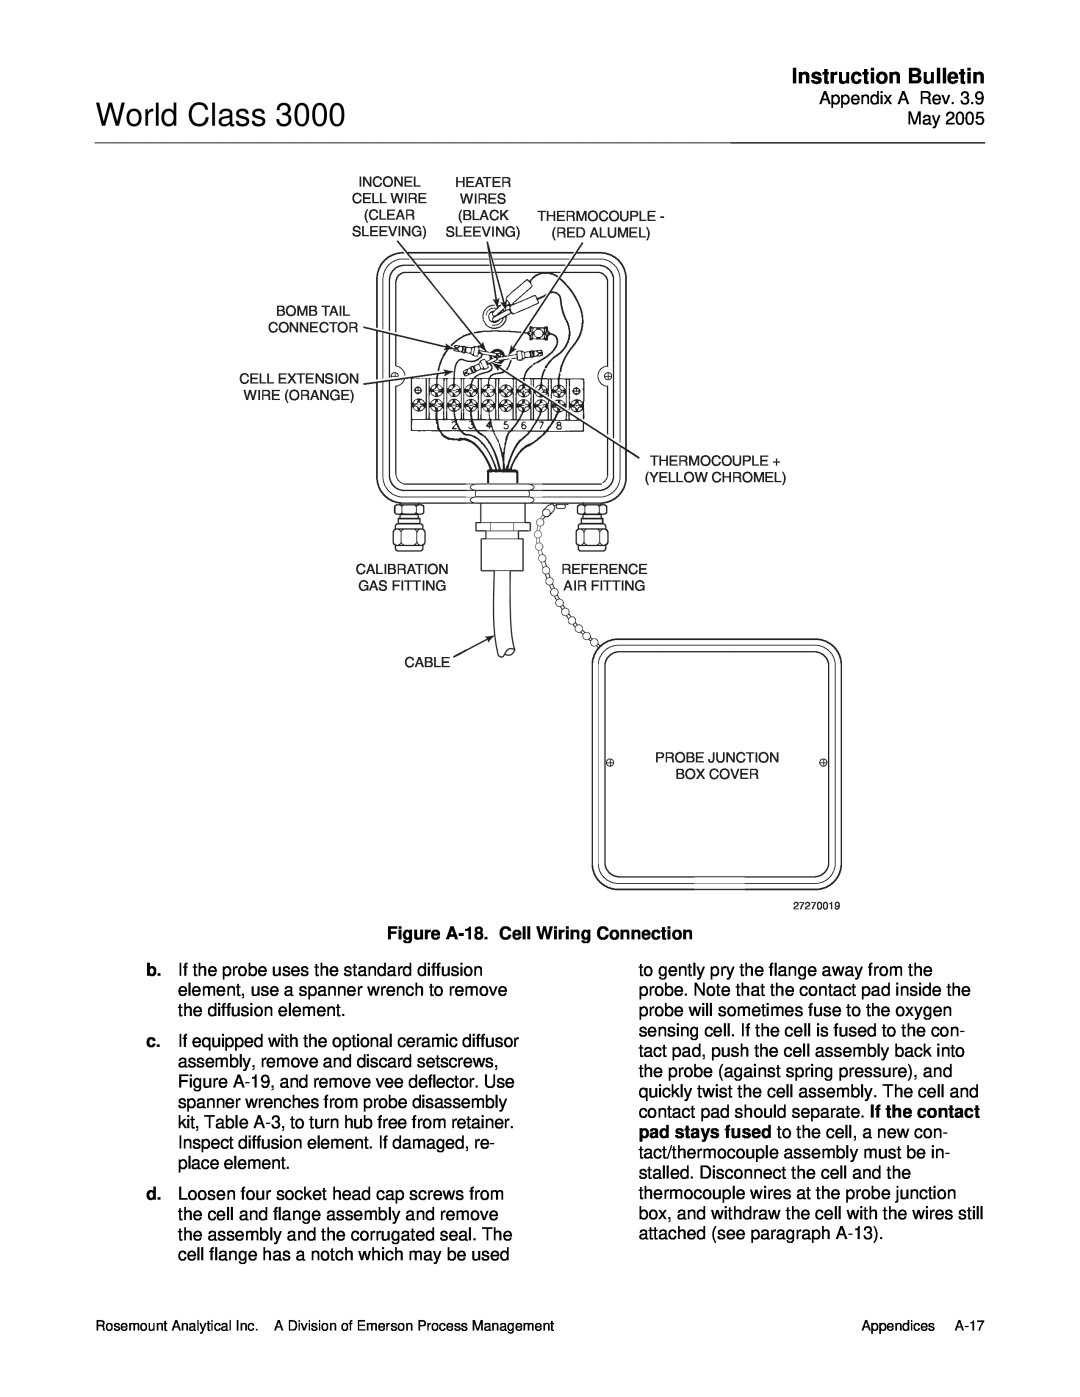 Emerson 3000 instruction manual World Class, Instruction Bulletin, Figure A-18.Cell Wiring Connection 